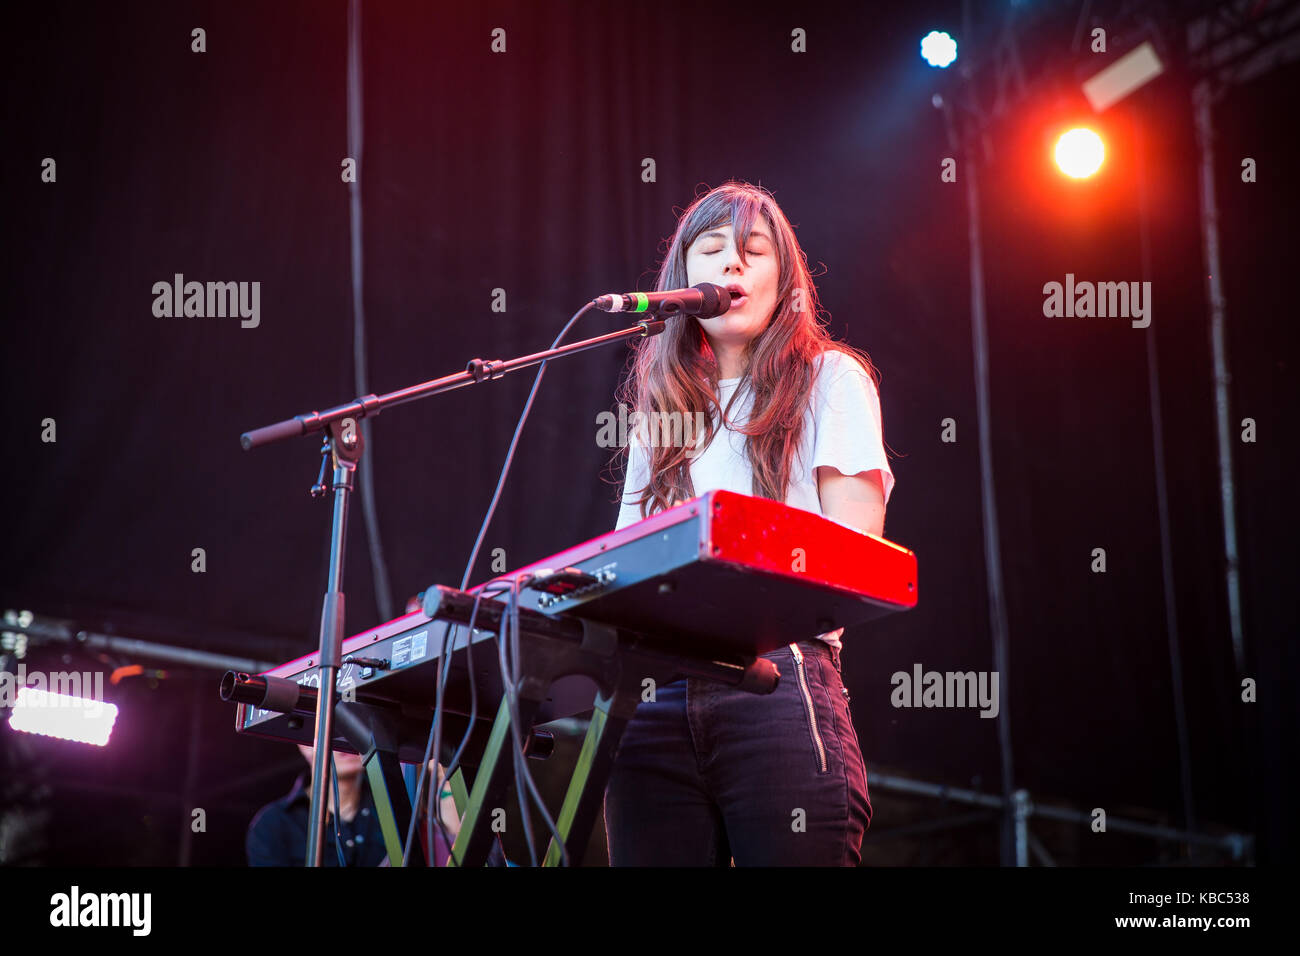 The American singer, musician and composer Julia Holter performs a live concert at the Norwegian music festival Øyafestivalen 2016 in Oslo. Norway, 11/08 2016. Stock Photo